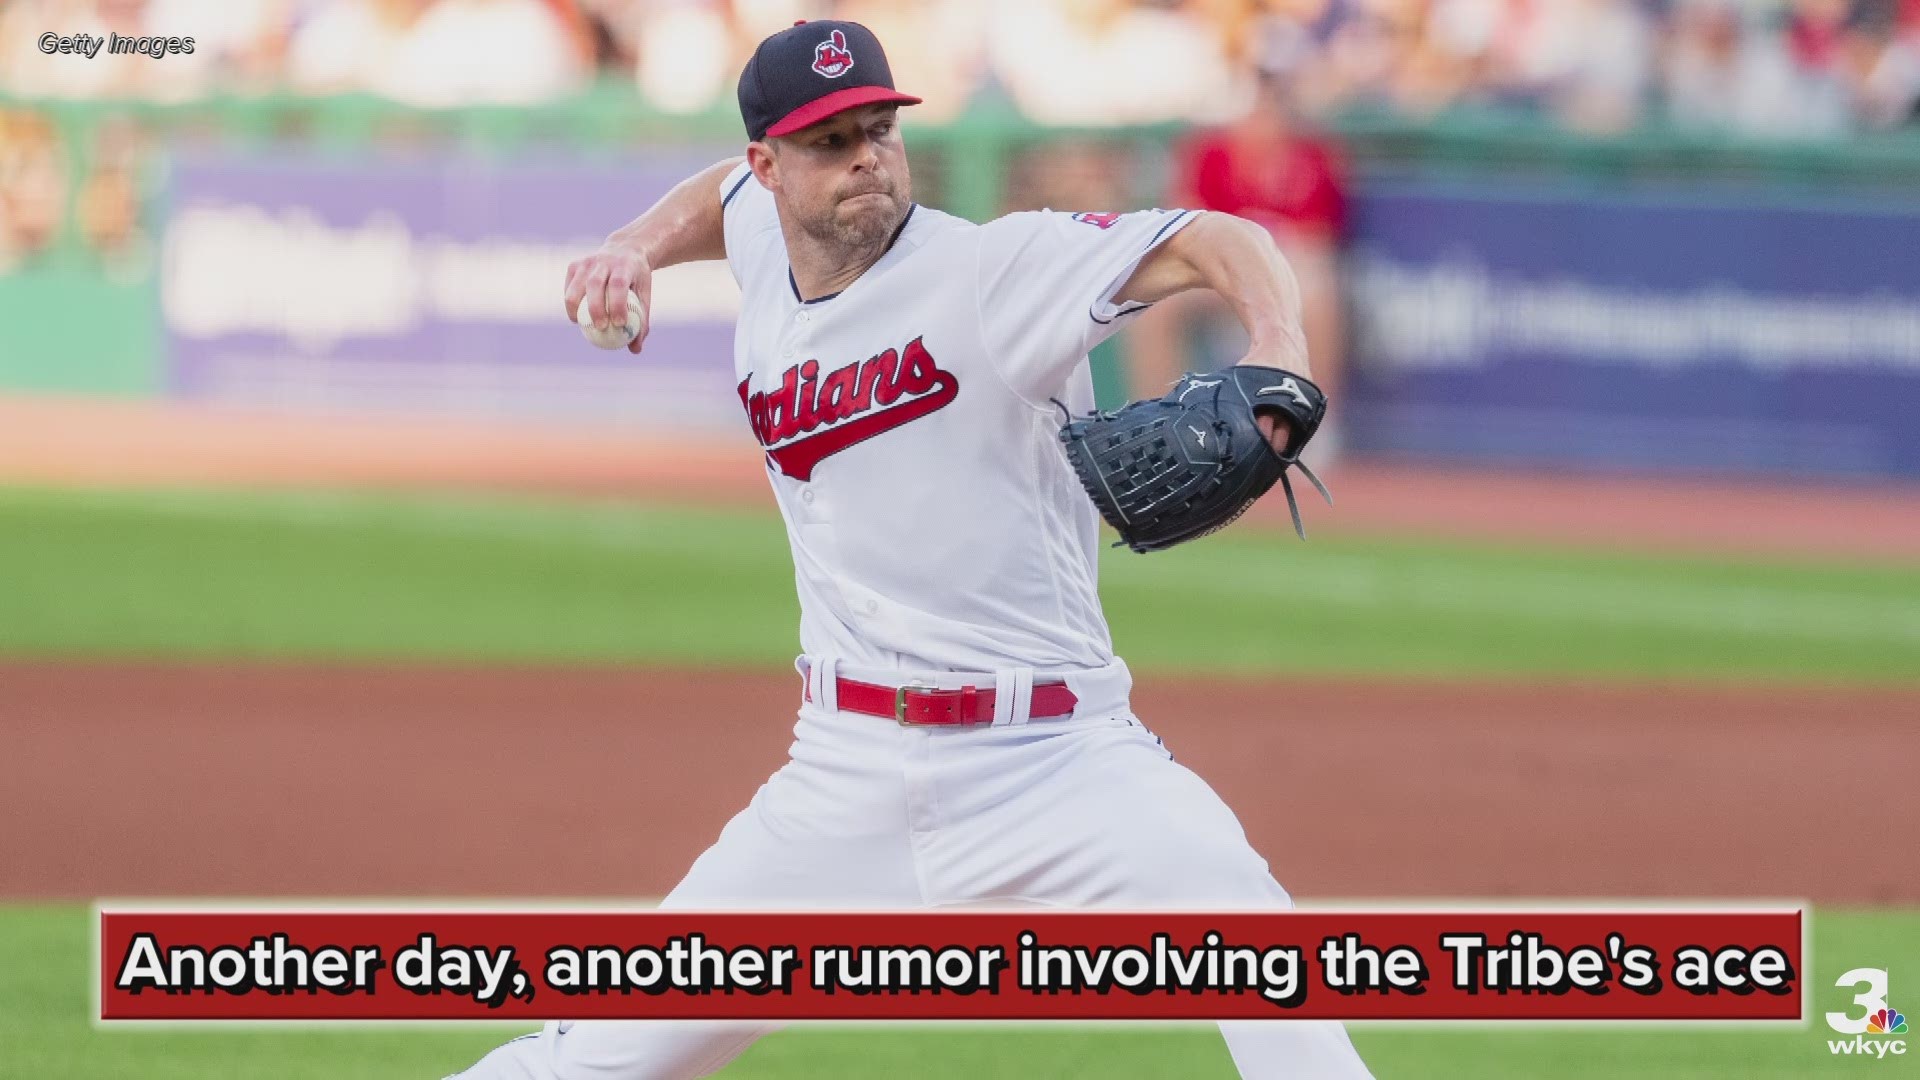 Reportedly, the Cleveland Indians are discussing a three-team trade with the San Diego Padres and Cincinnati Reds for ace pitcher Corey Kluber.